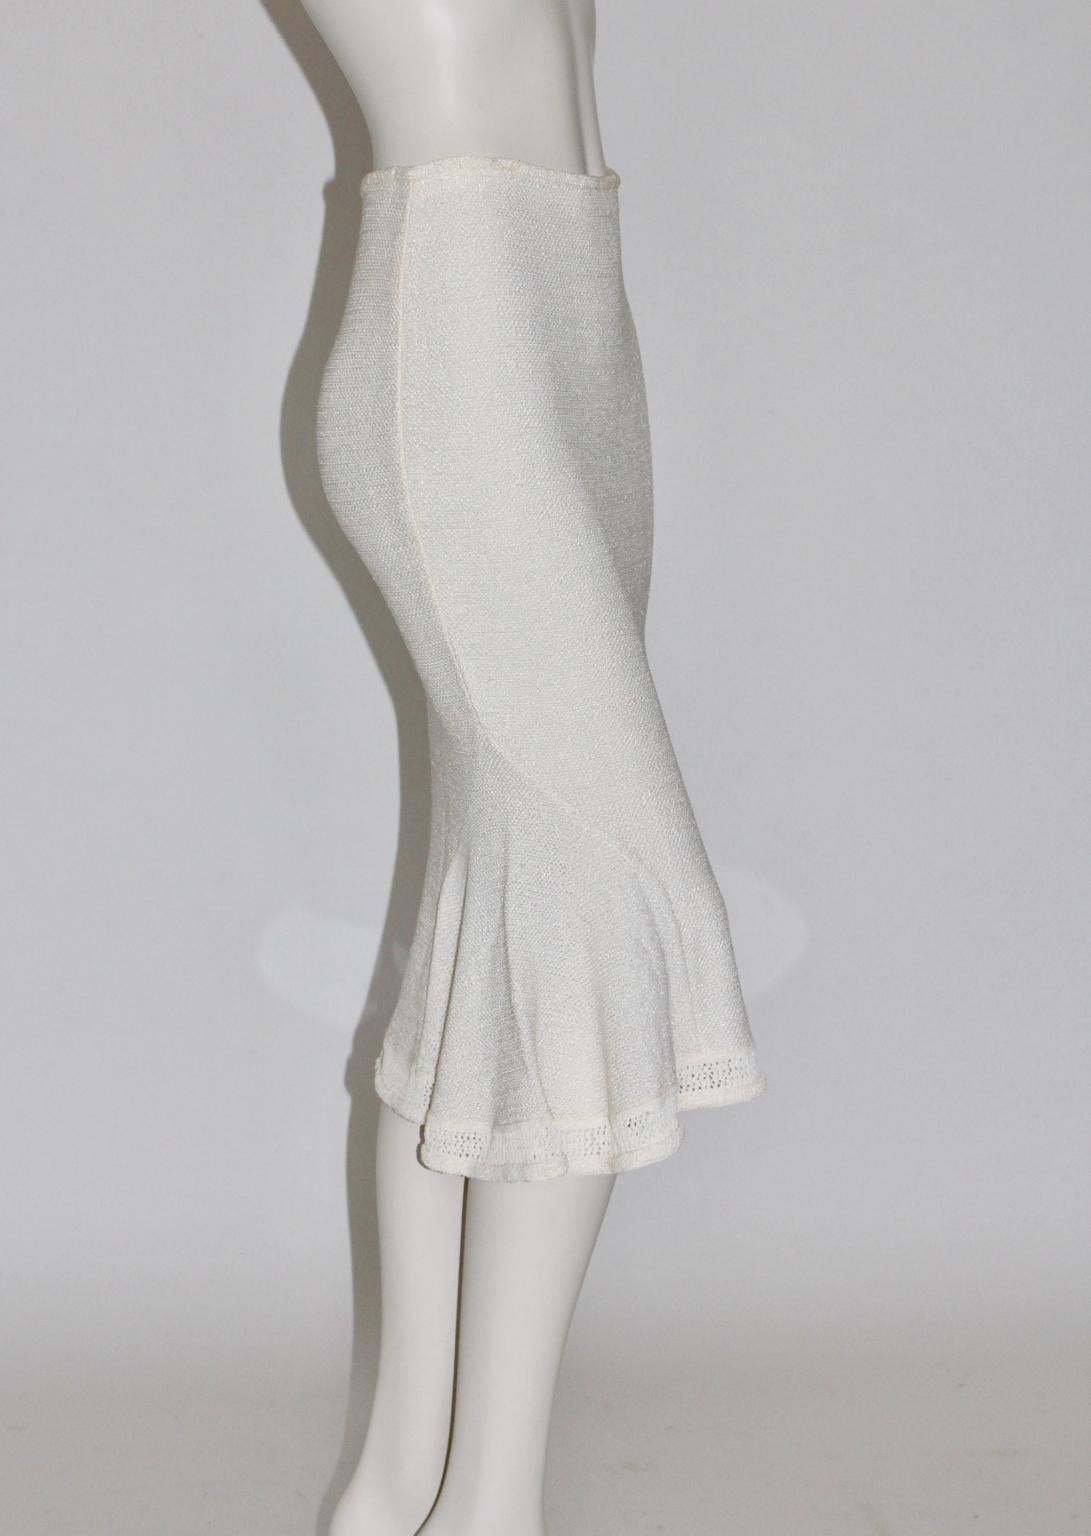 We present an eye-catching knit skirt in the color off white.
The skirt is easy to combine and it will be your favourite piece in your wardrobe.
This high-quality off white knit skirt by John Galliano Paris from the 1990s was made of 70 % Viscose